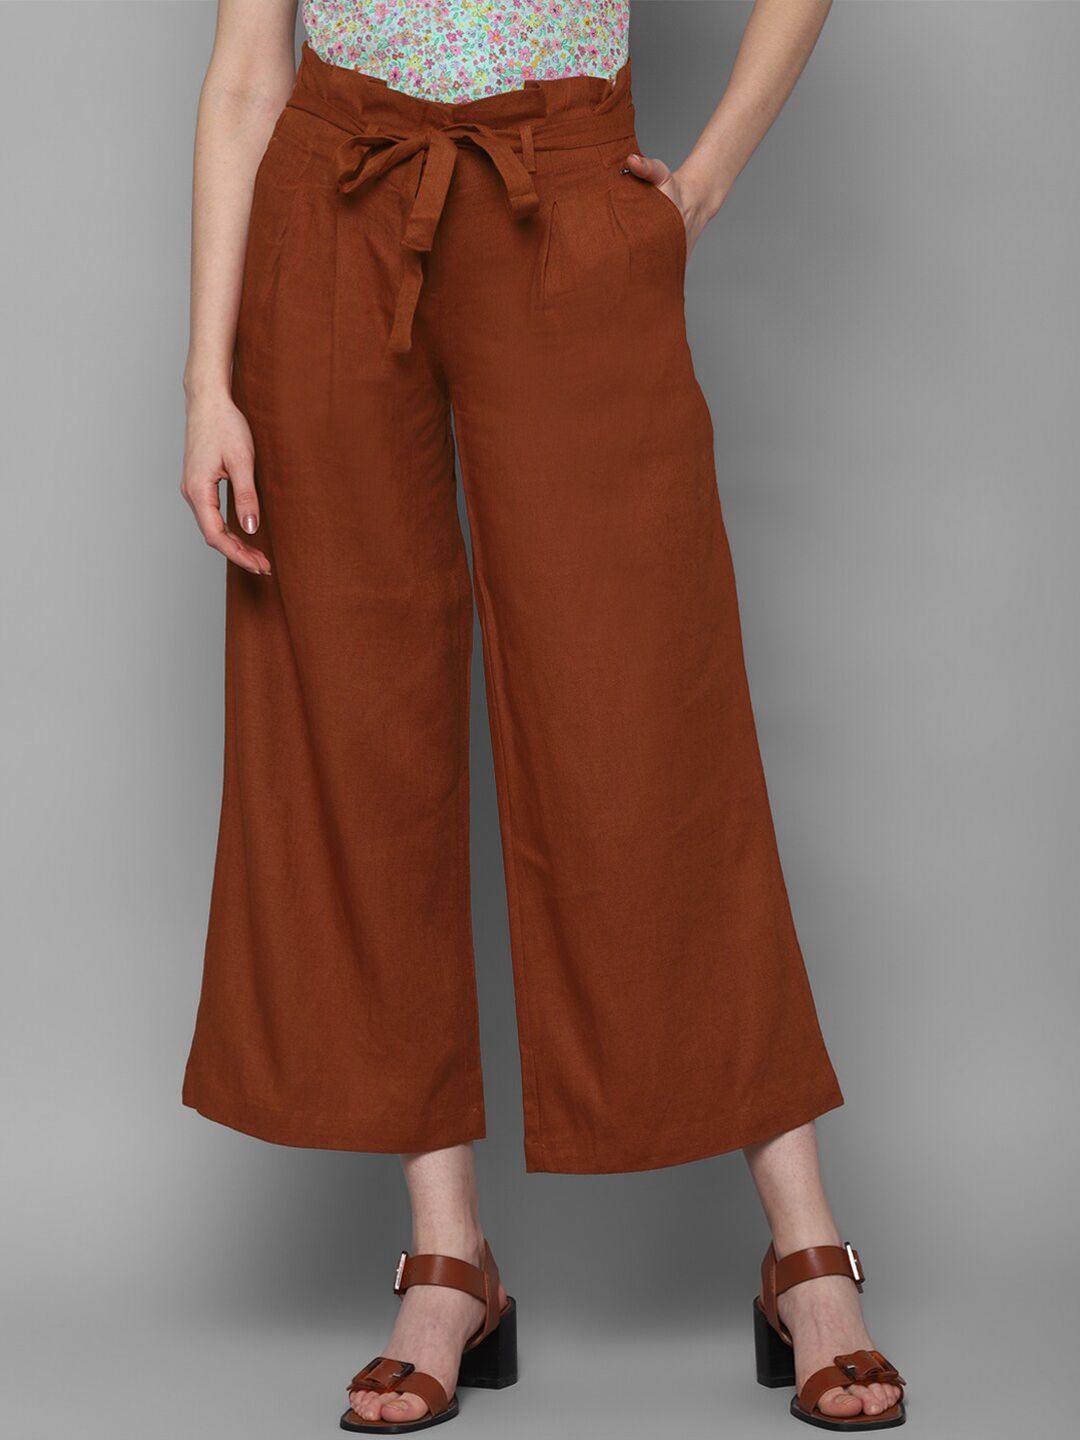 Allen Solly Woman Women Maroon Pleated Trousers Price in India